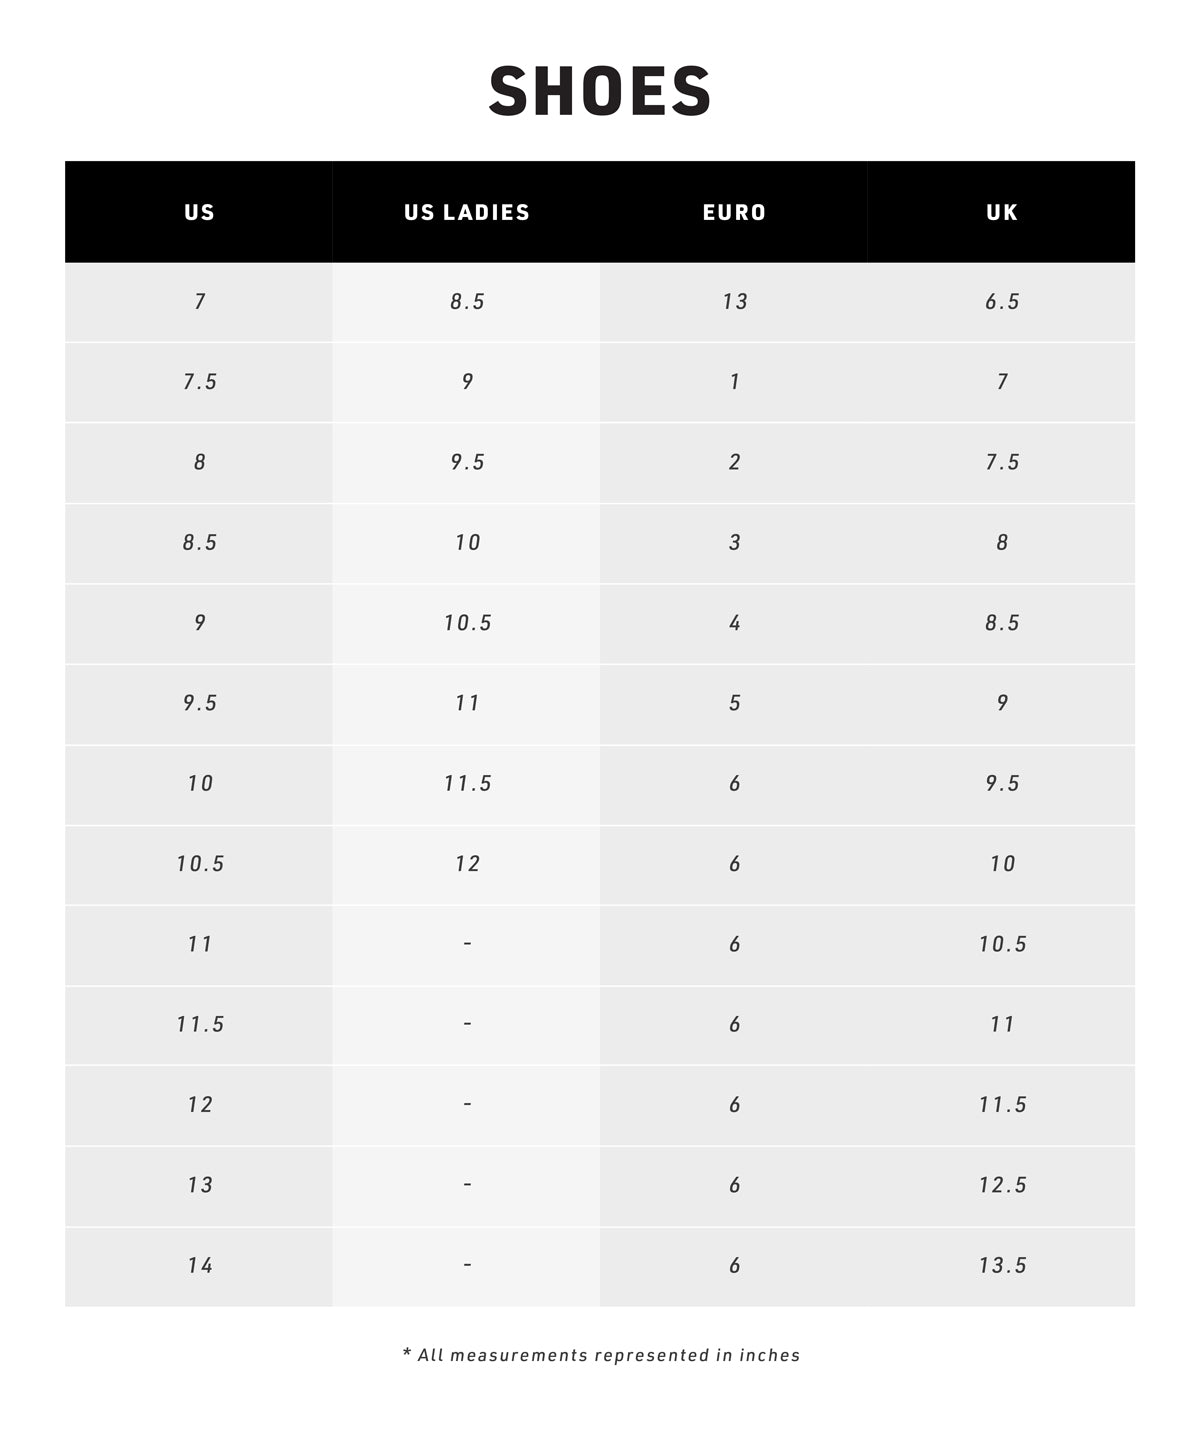 Deal Jeans Size Chart